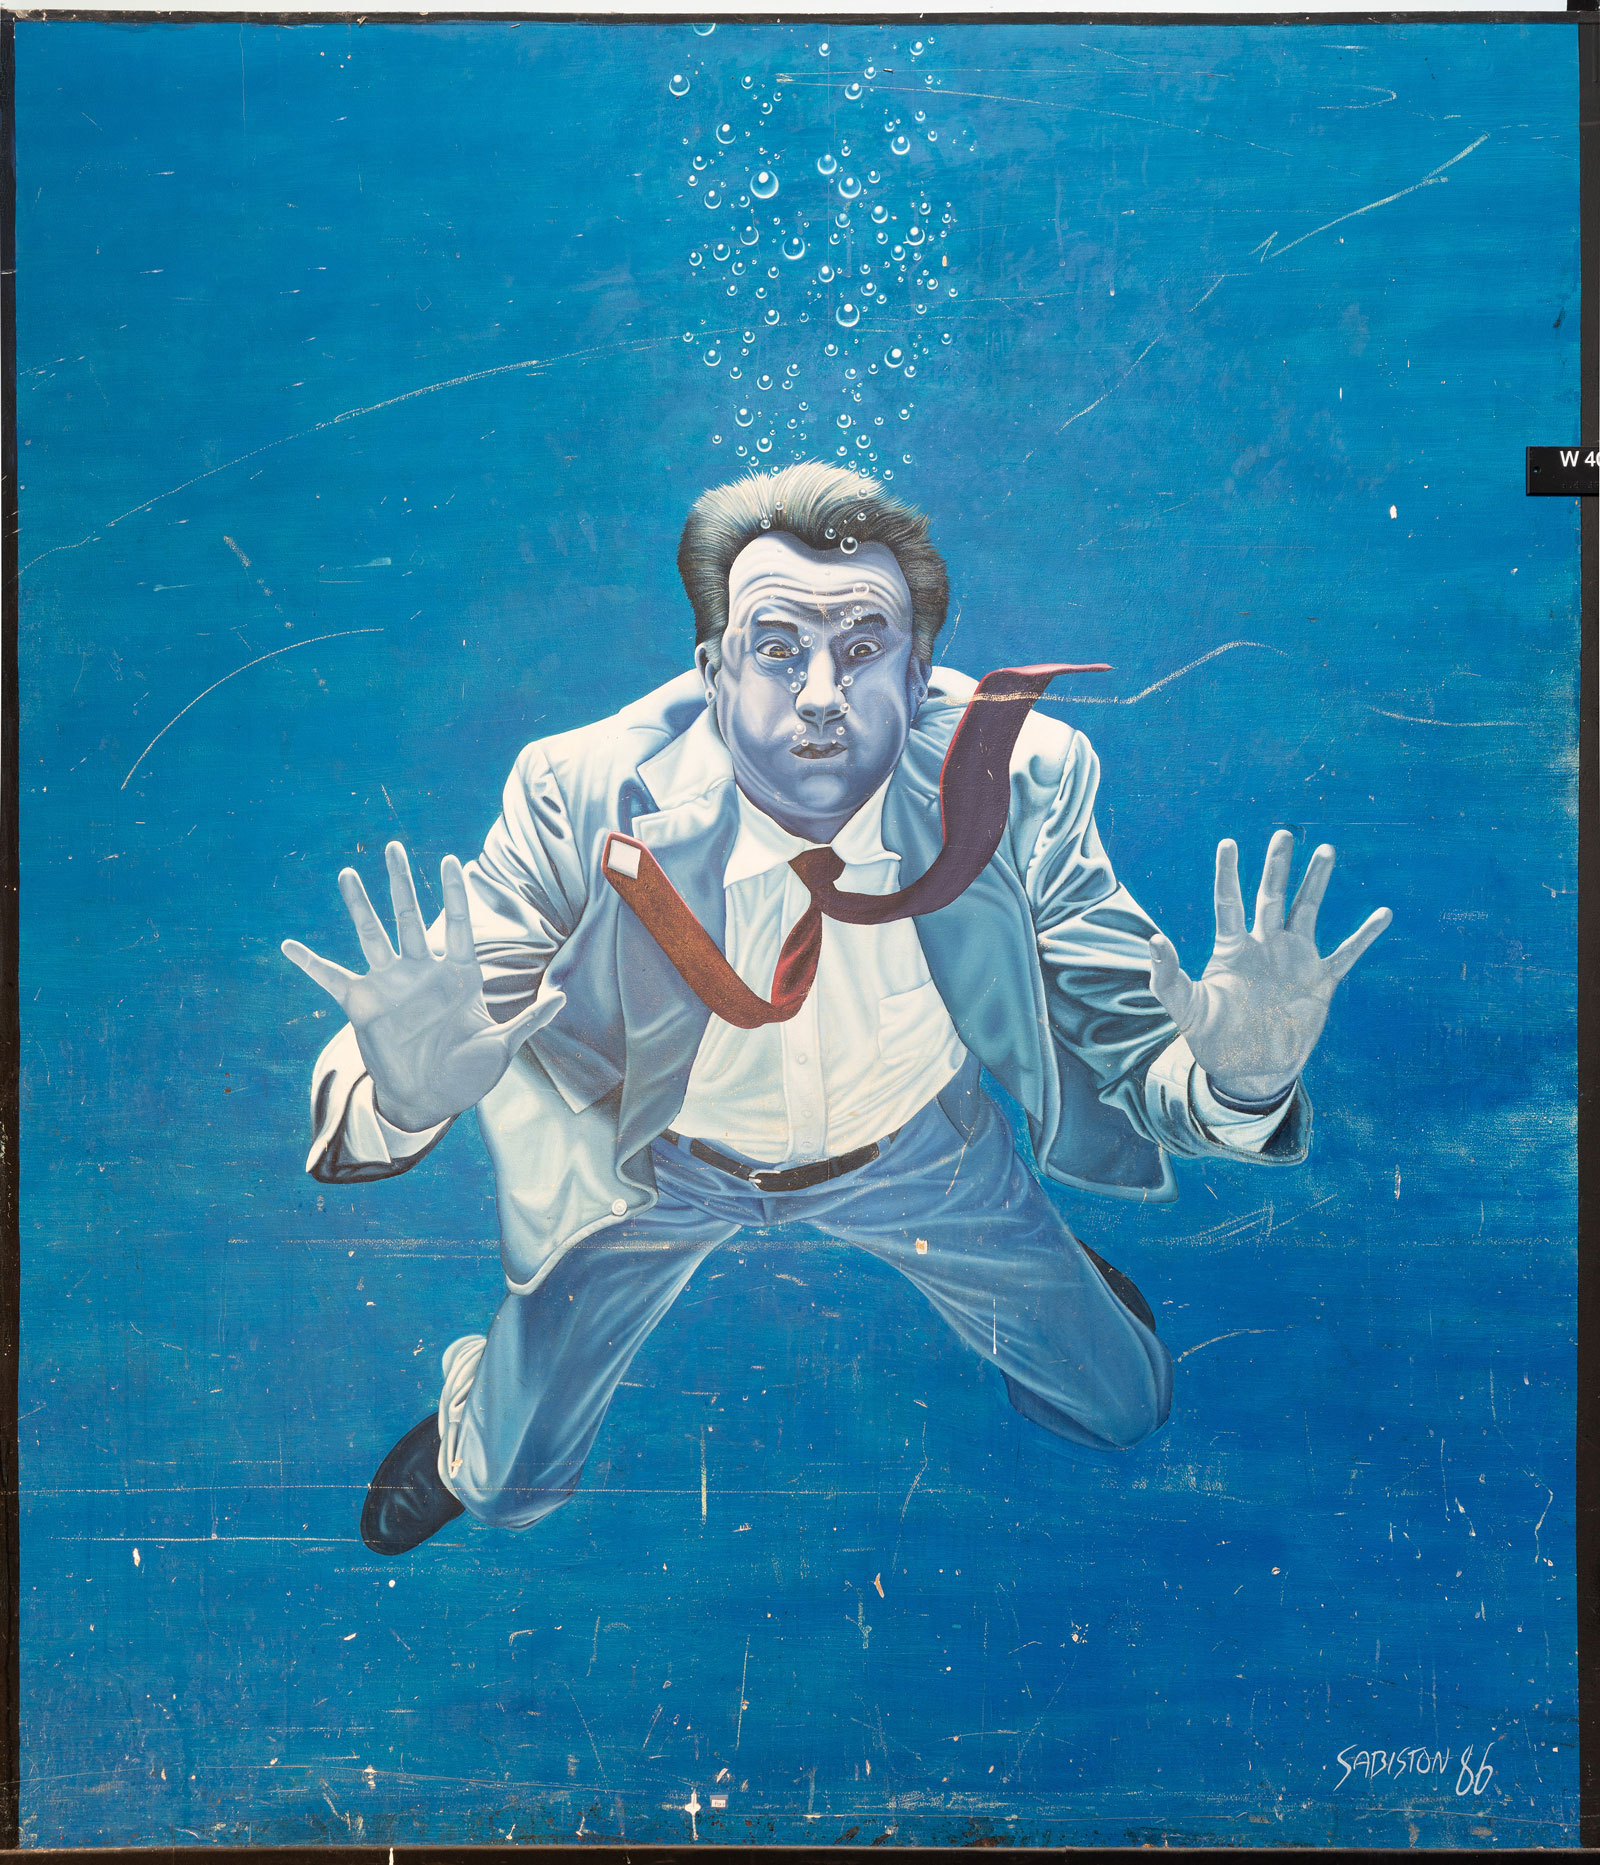 The Drowning Man mural